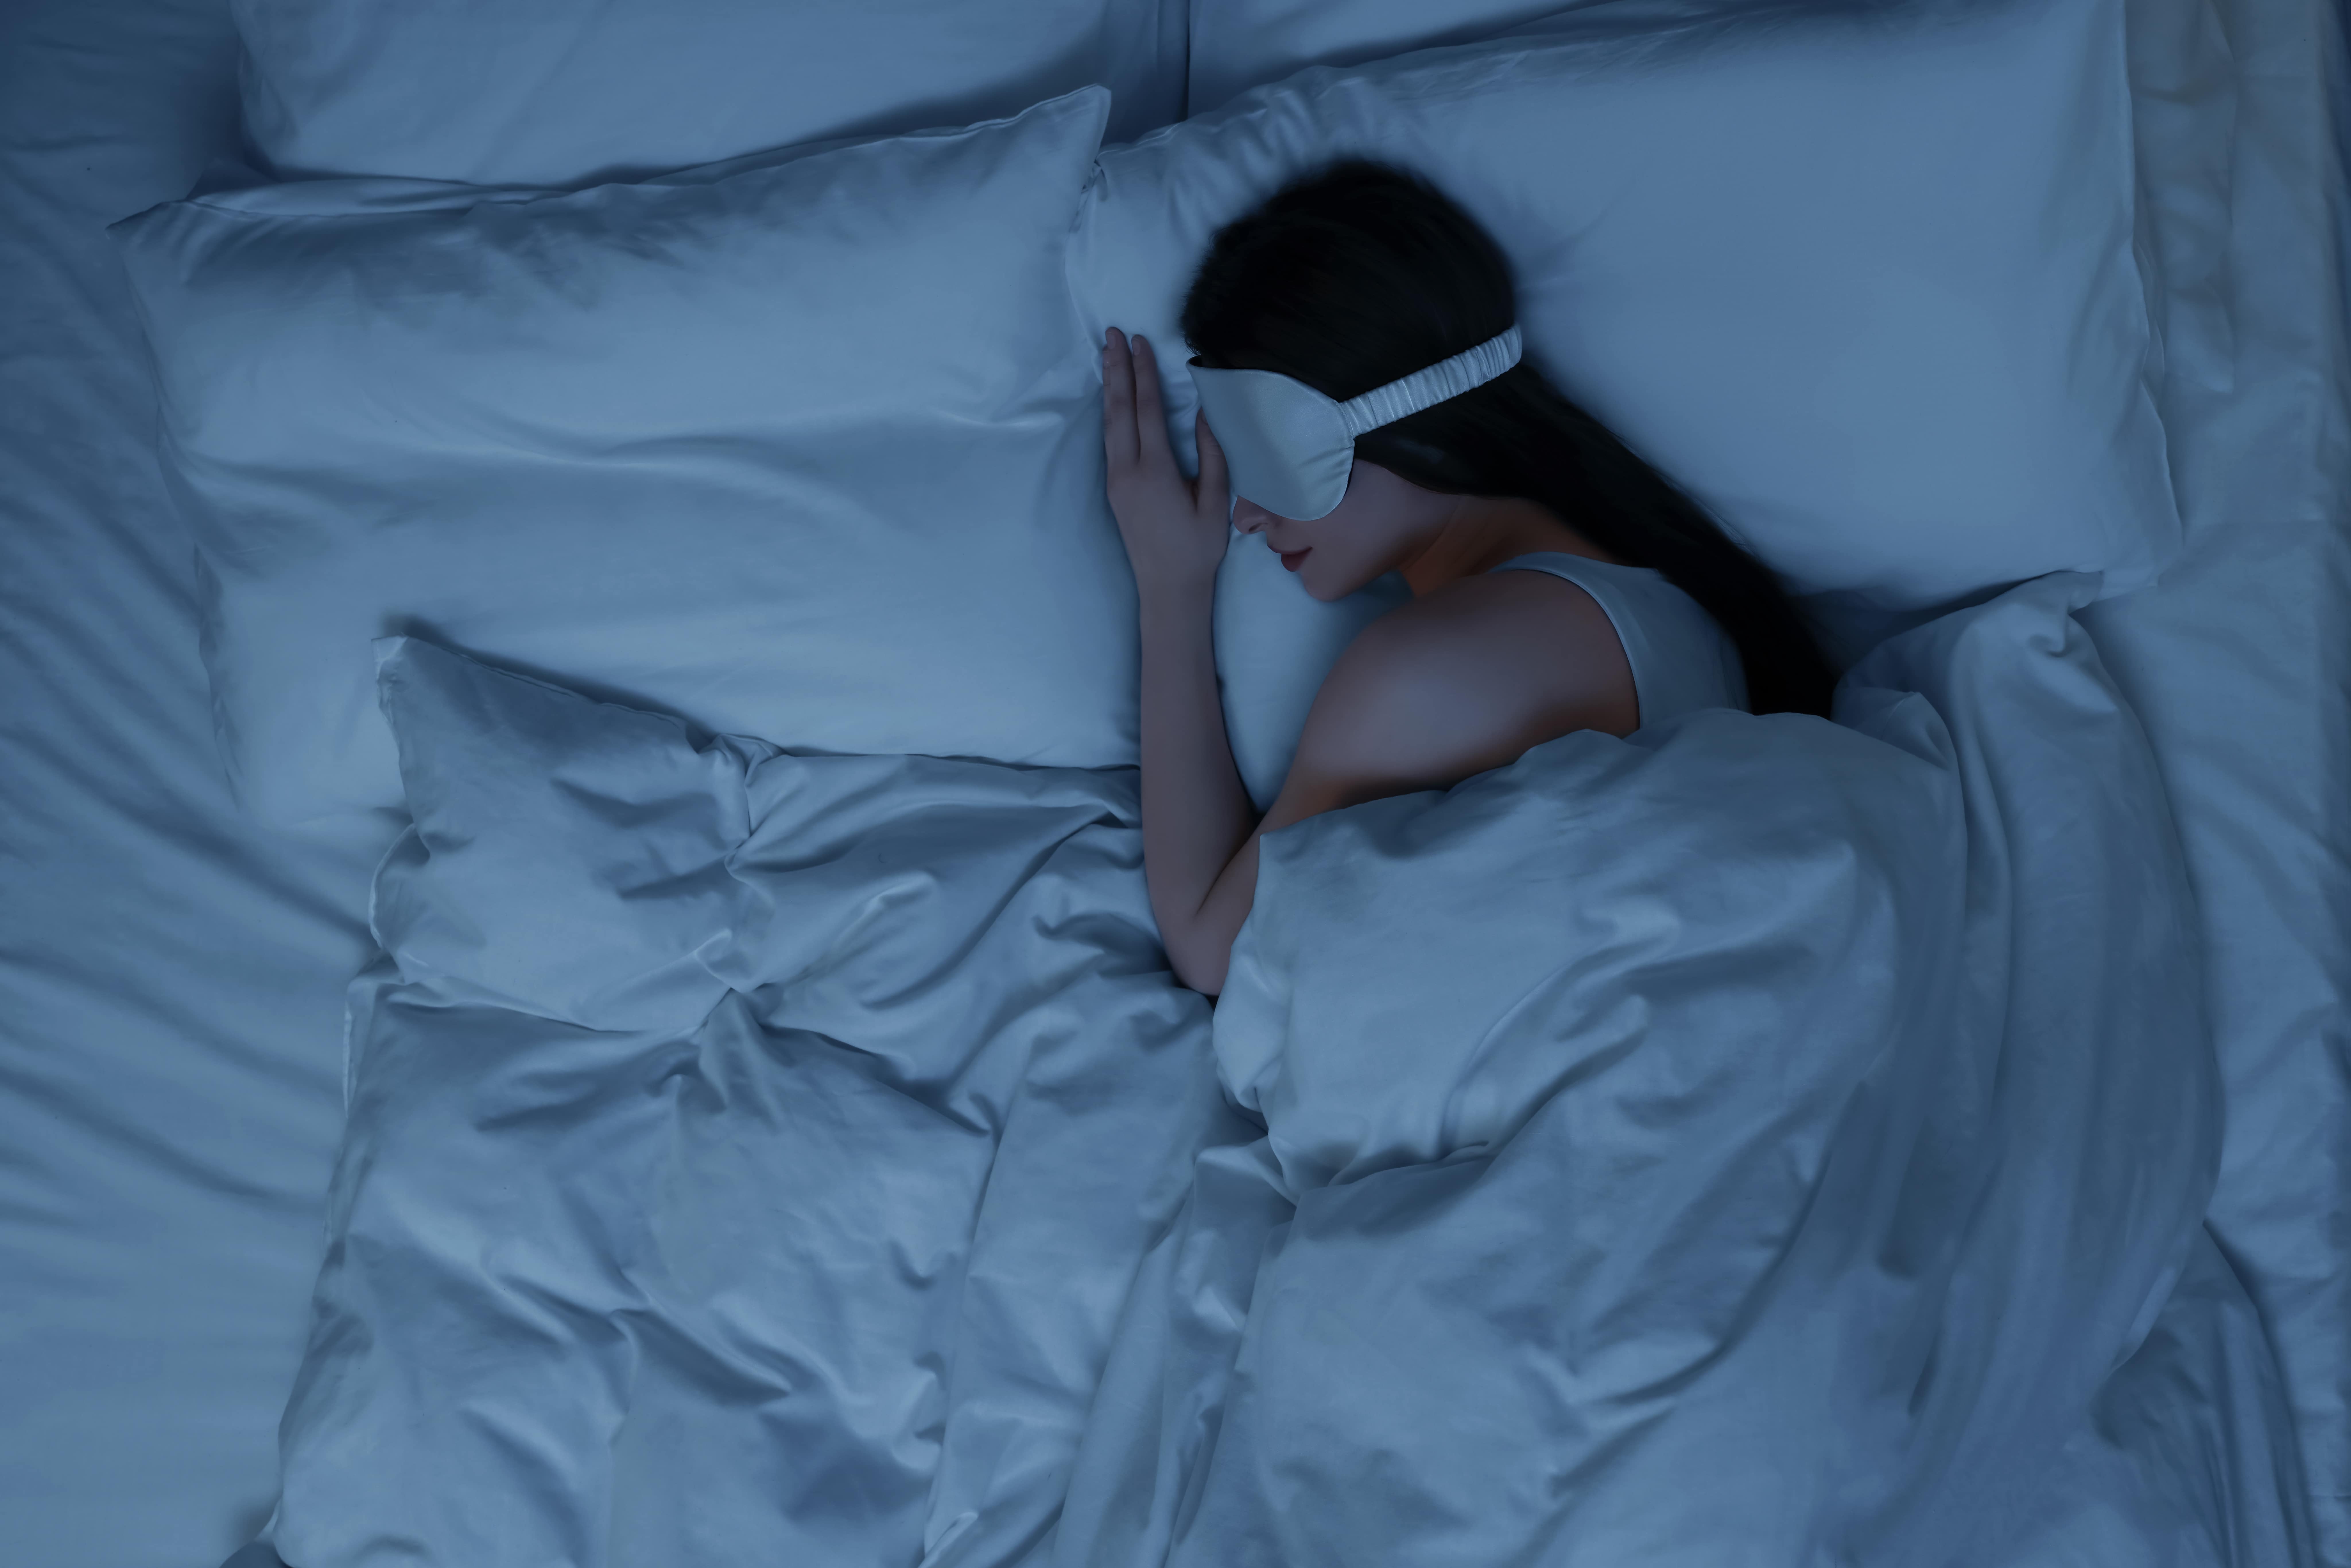 A lady asleep in the dark wearing an eye mask to prevent light disturbances affecting her sleep quality